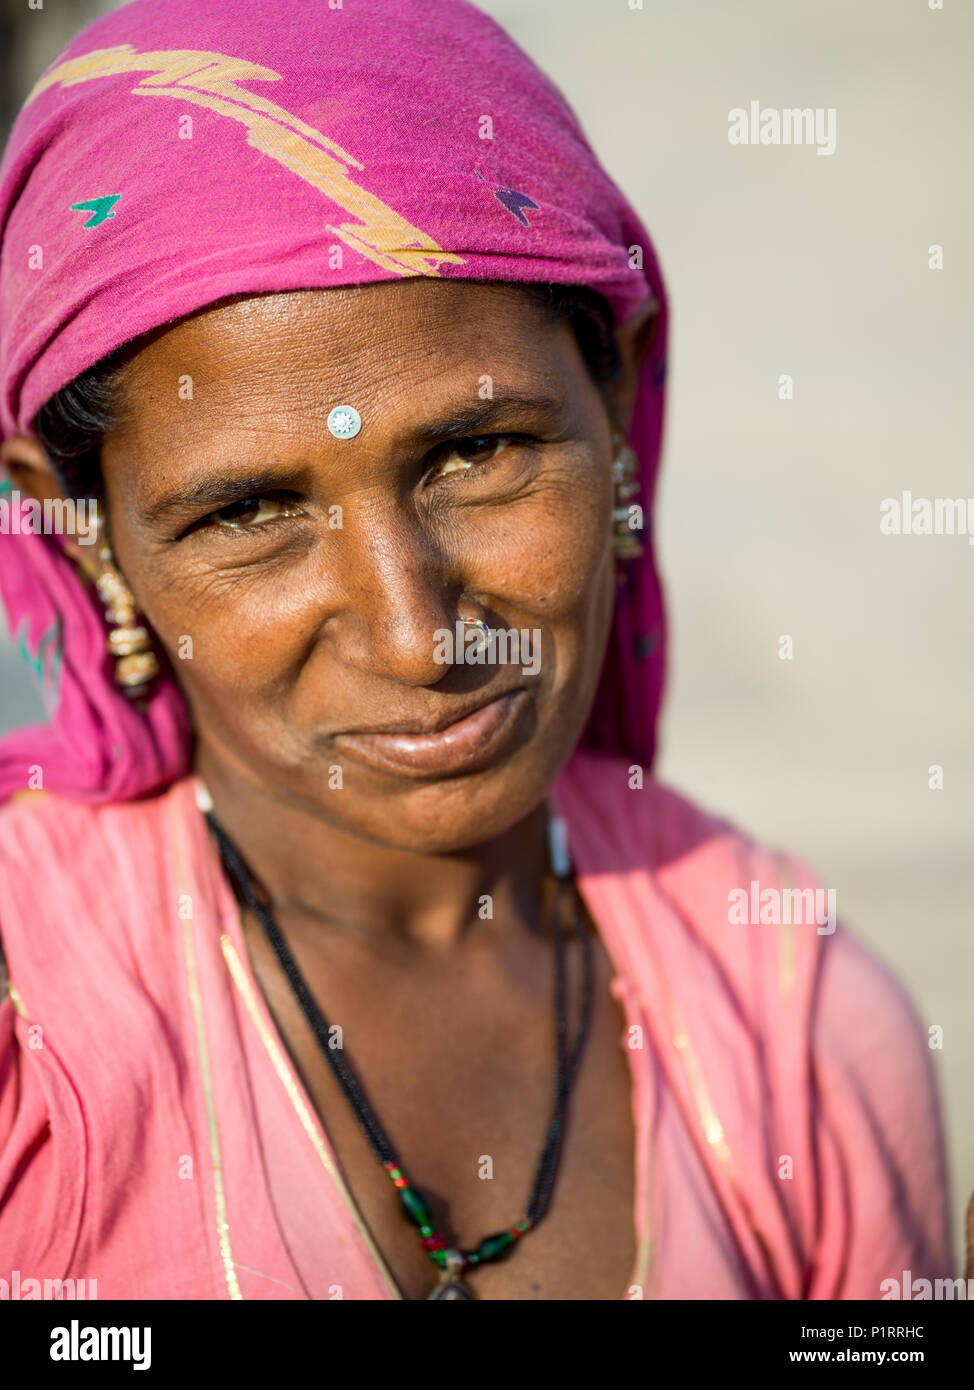 Portrait of an Indian woman with a bindi; Jaisalmer, Rajasthan, India Stock Photo